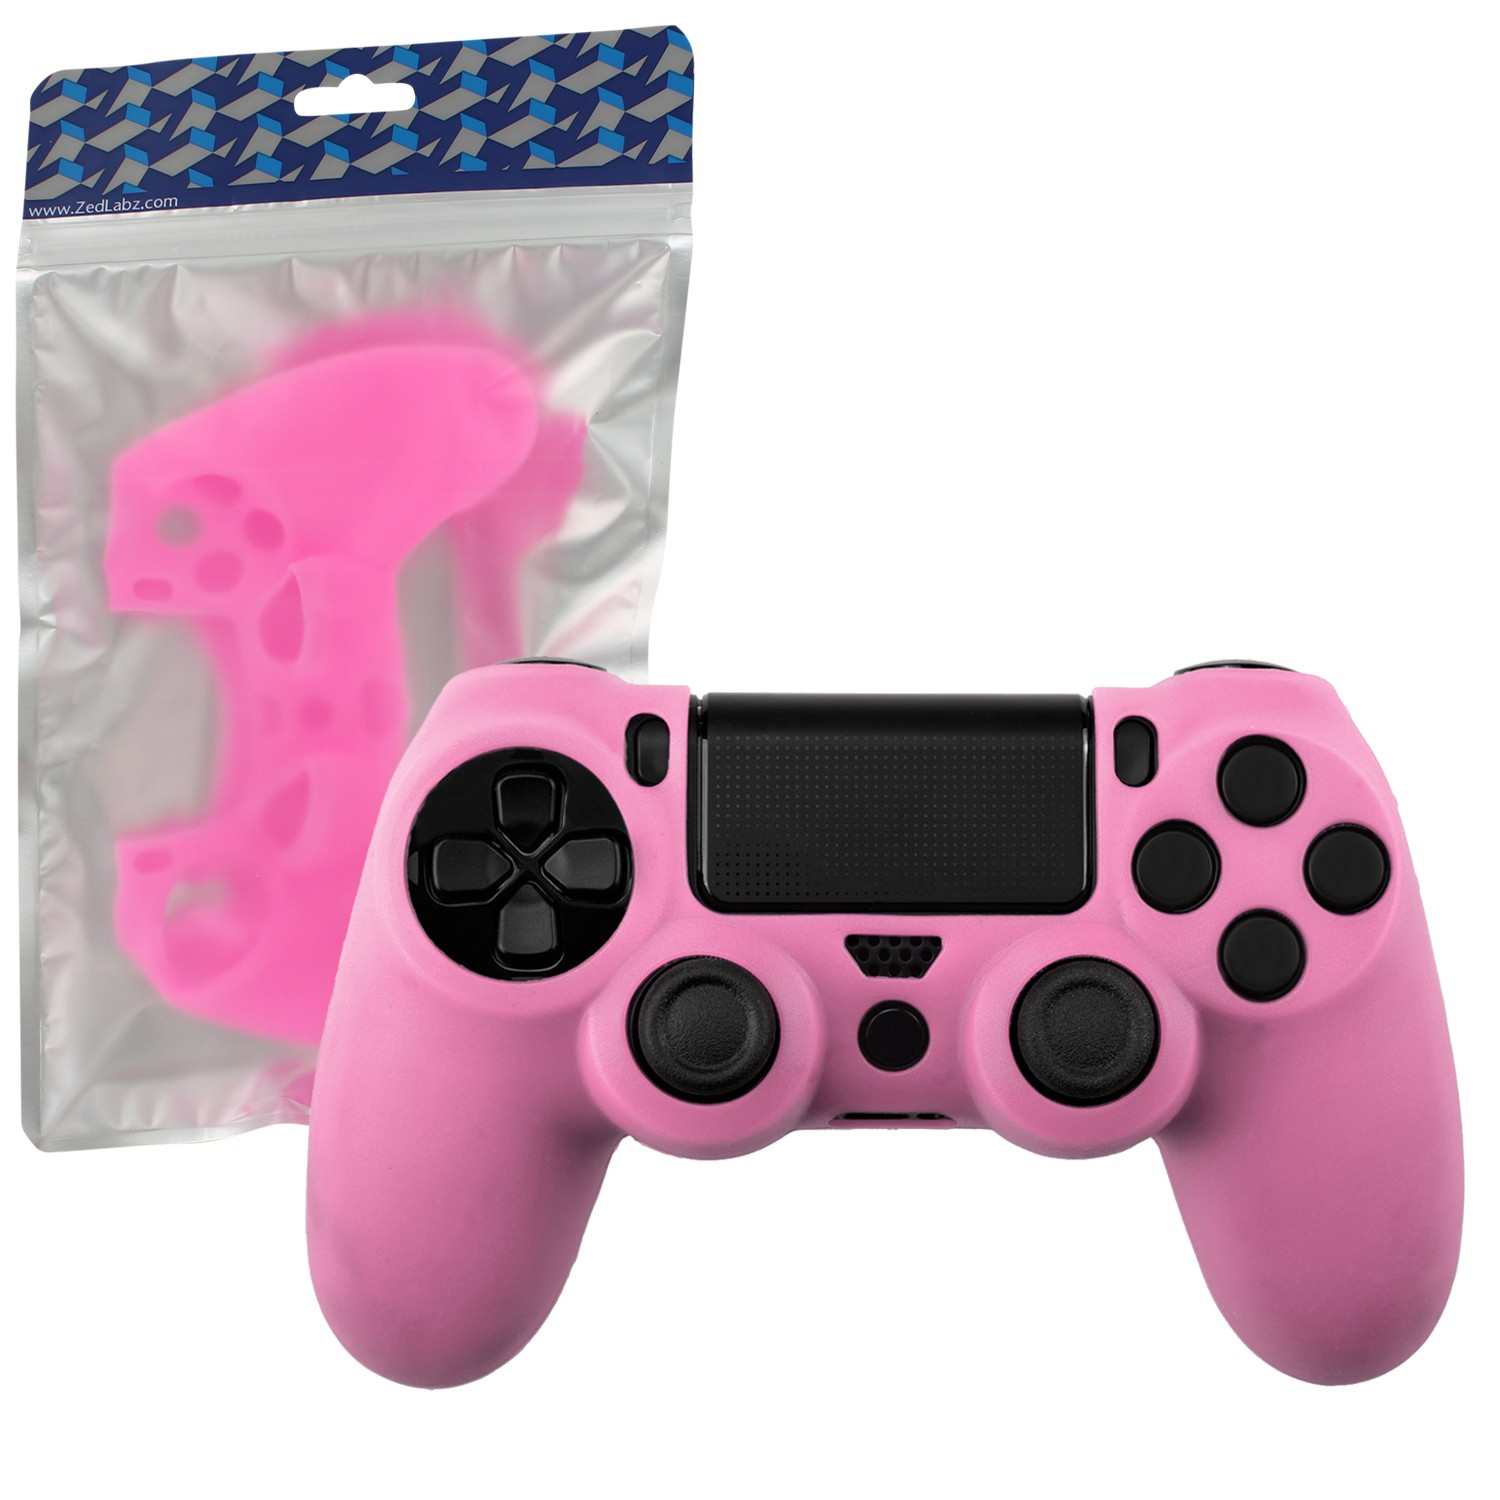 Kop Zedlabz Soft Silicone Rubber Skin Grip Cover For Sony Ps4 Controller With Ribbed Handle Pink